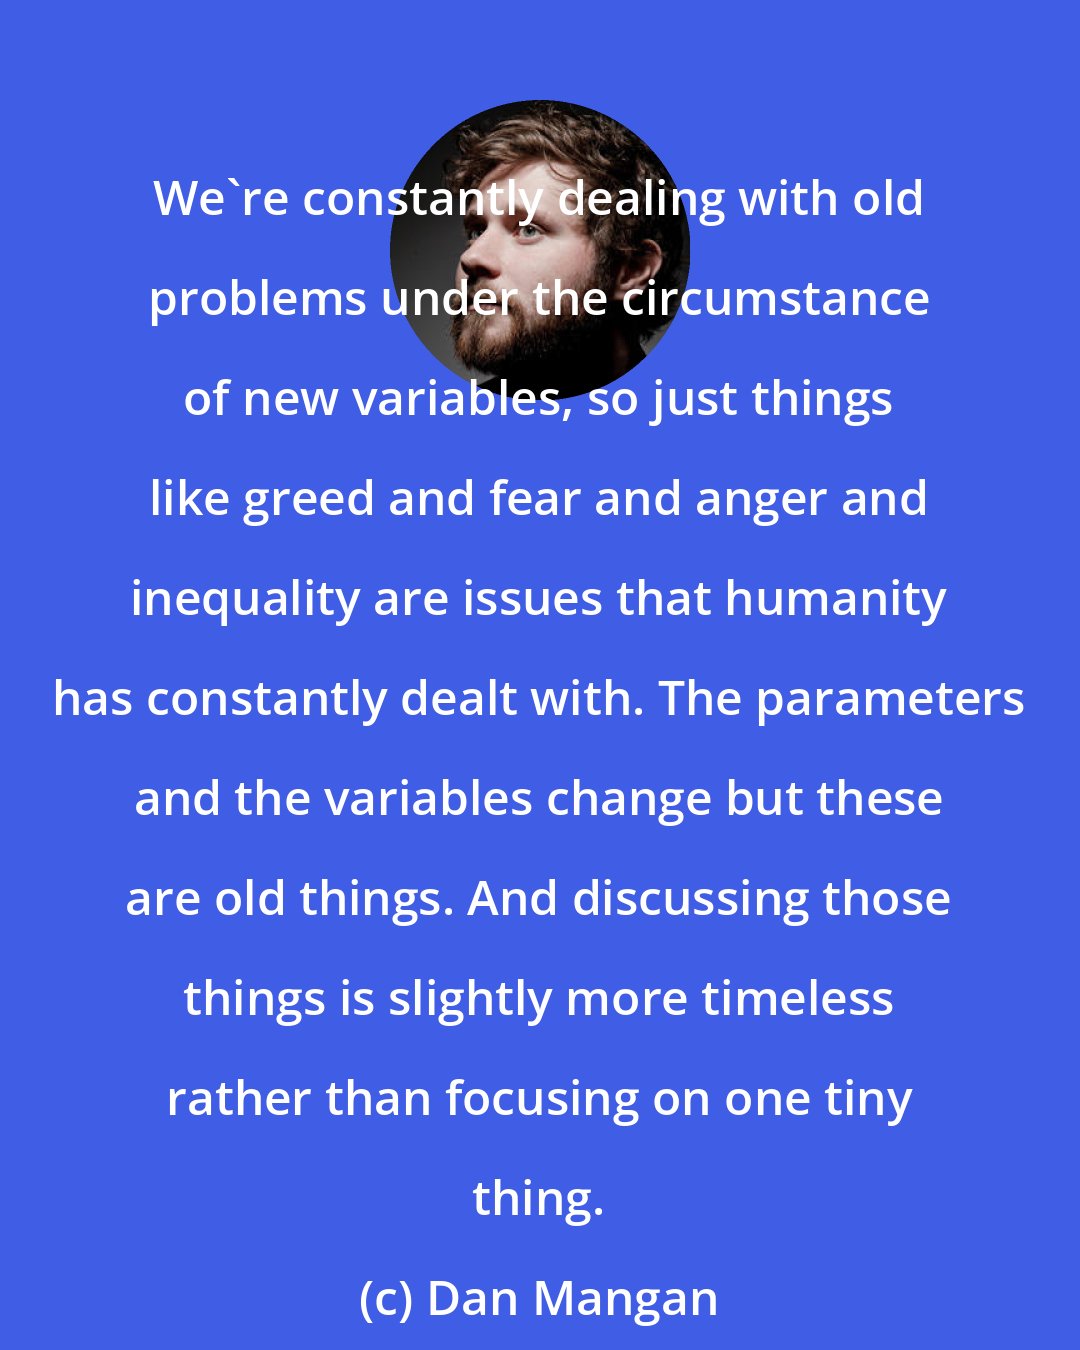 Dan Mangan: We're constantly dealing with old problems under the circumstance of new variables, so just things like greed and fear and anger and inequality are issues that humanity has constantly dealt with. The parameters and the variables change but these are old things. And discussing those things is slightly more timeless rather than focusing on one tiny thing.